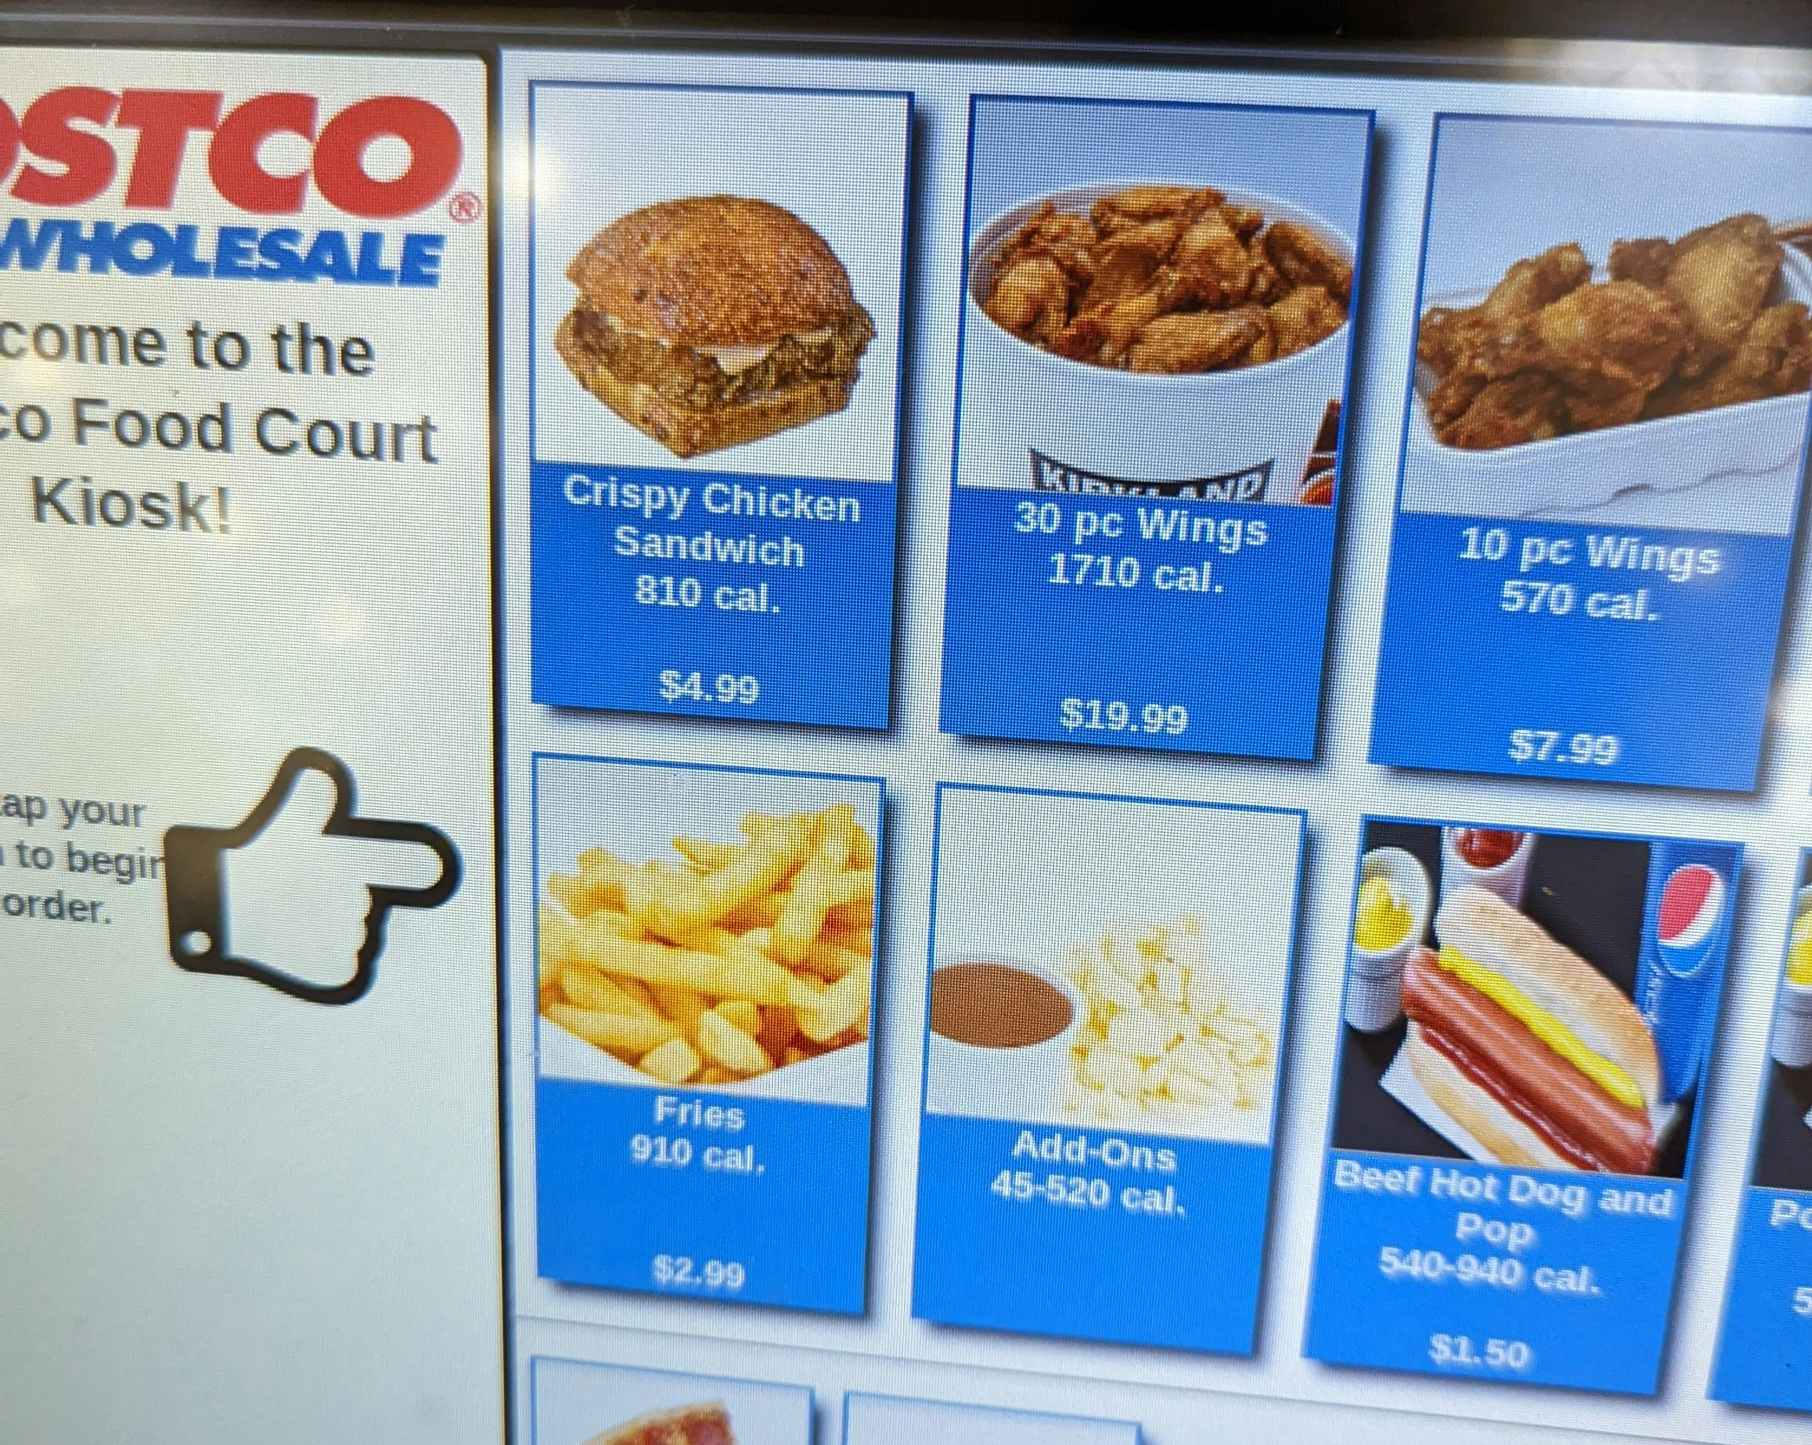 A close- up of the Costco food court kiosk screen showing uncommon regional food items